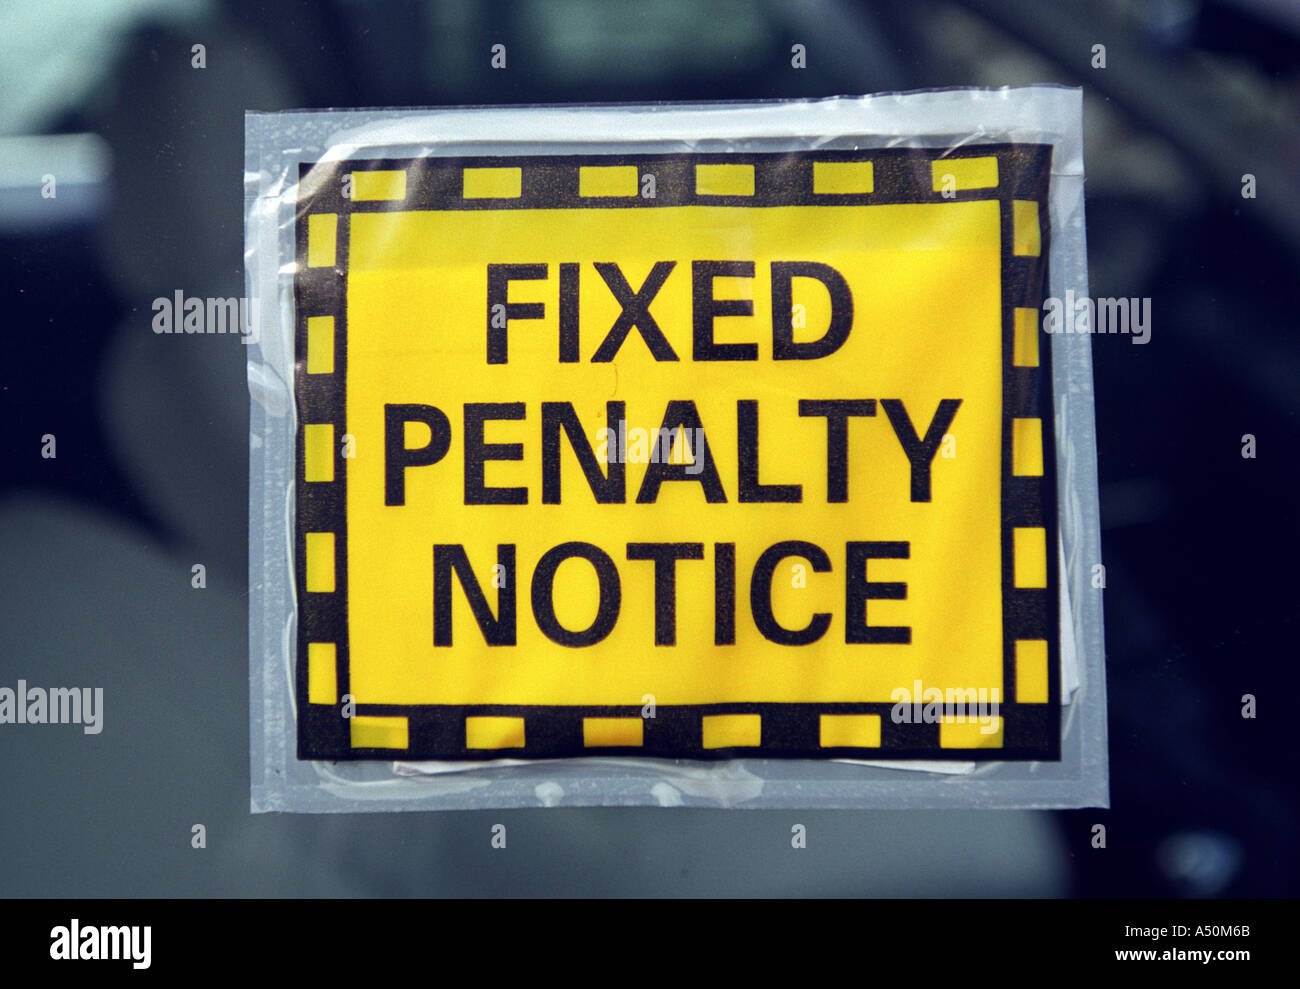 A Fixed Penalty Notice on a car windscreen Stock Photo